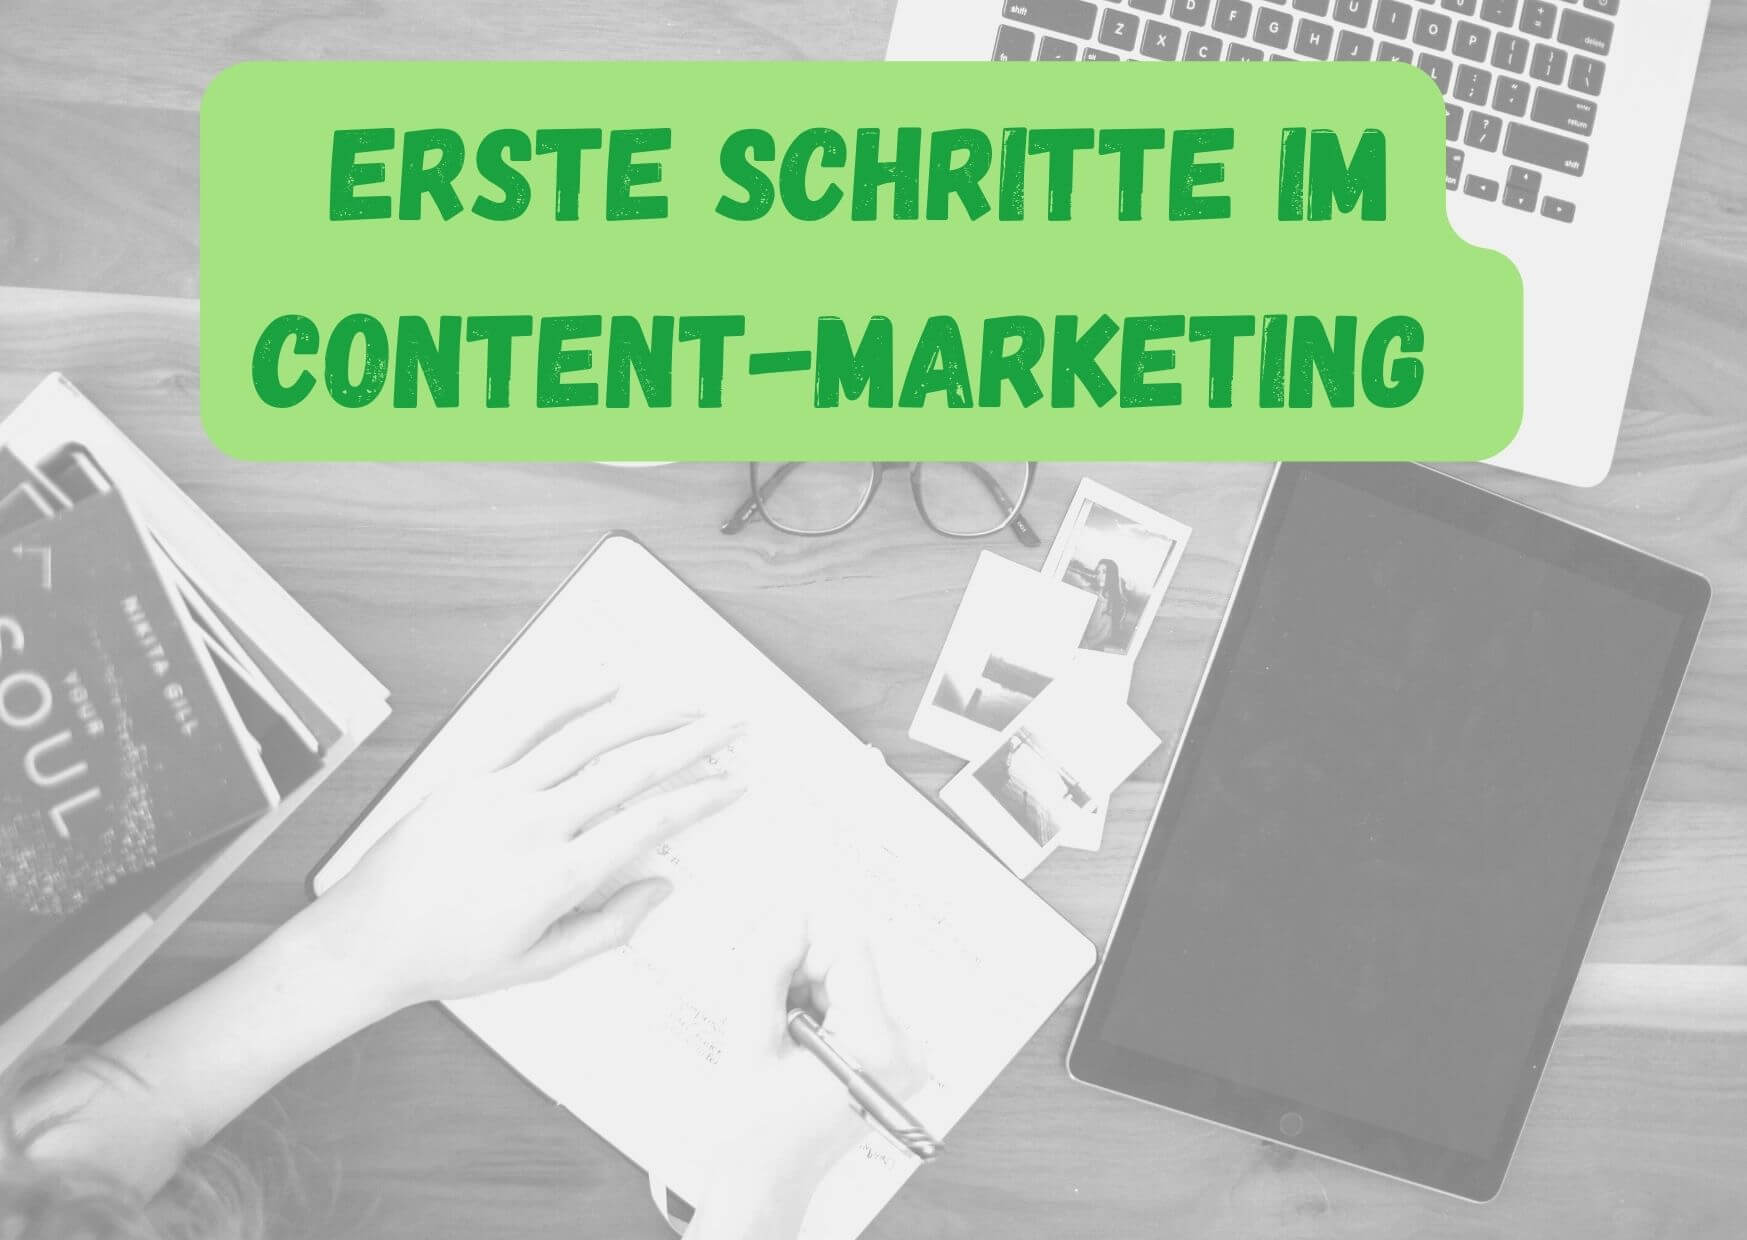 You are currently viewing Erste Schritte im Content-Marketing